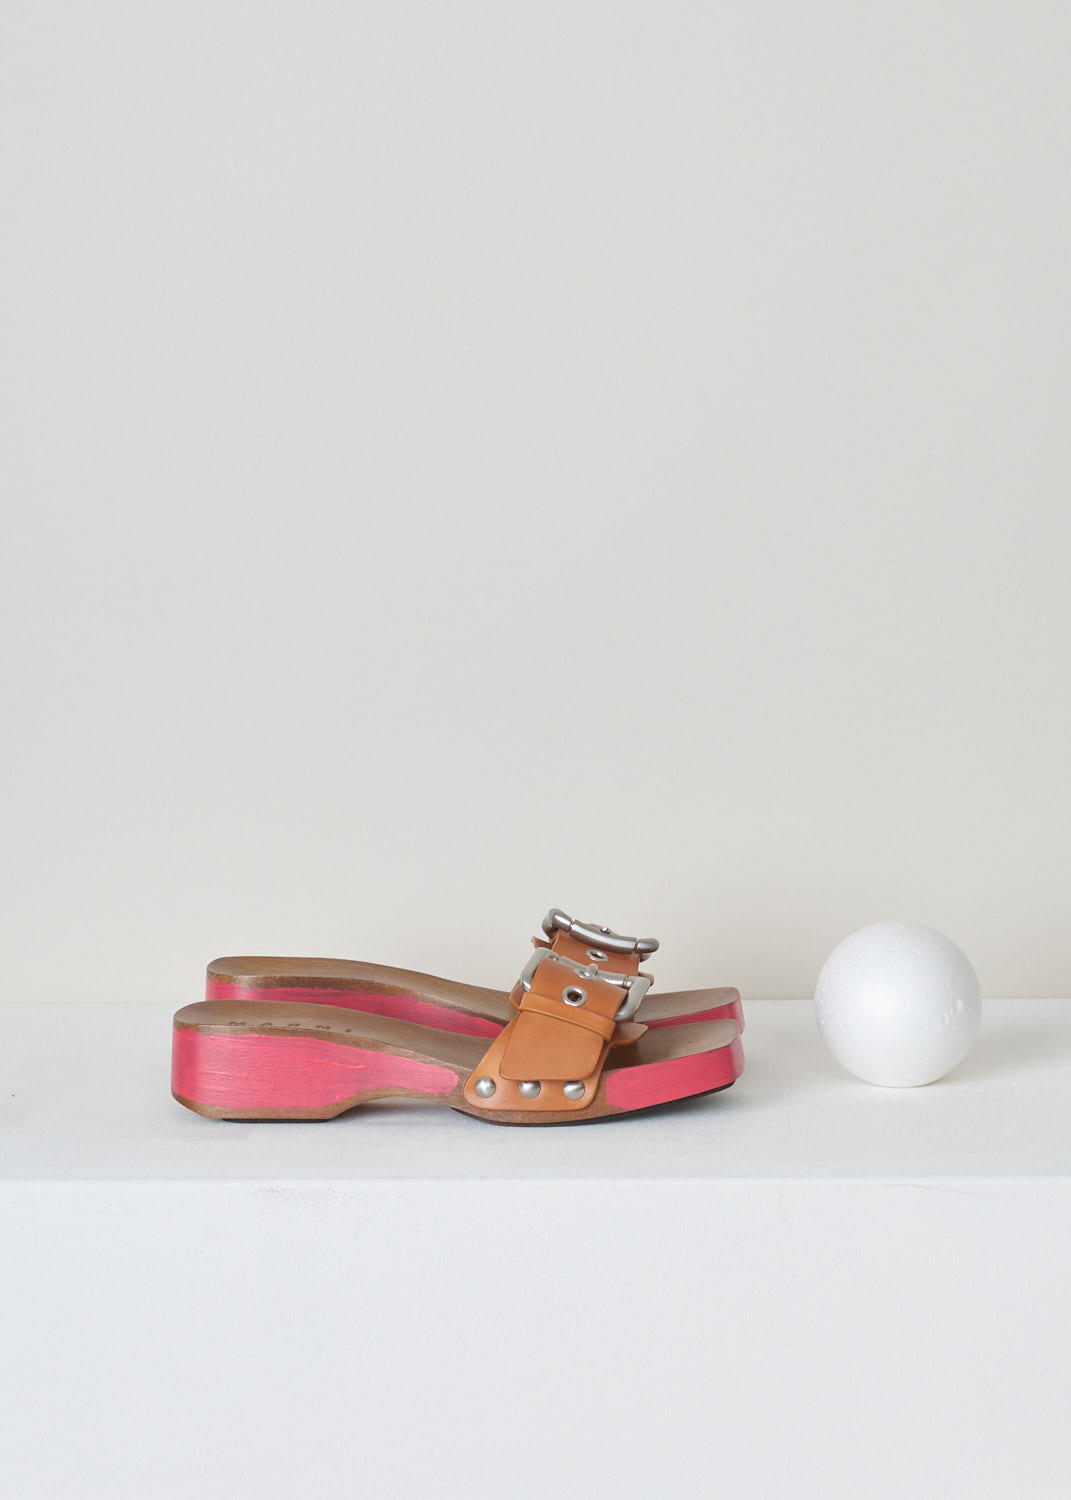 Marni, Red single-strap sandal with metal buckle, ZCMS000204_P3386_00M23, red, side, These one-band sandals have a metal buckle. The red coloration on the sides of these sandals are all hand painted and come with square cut toes.